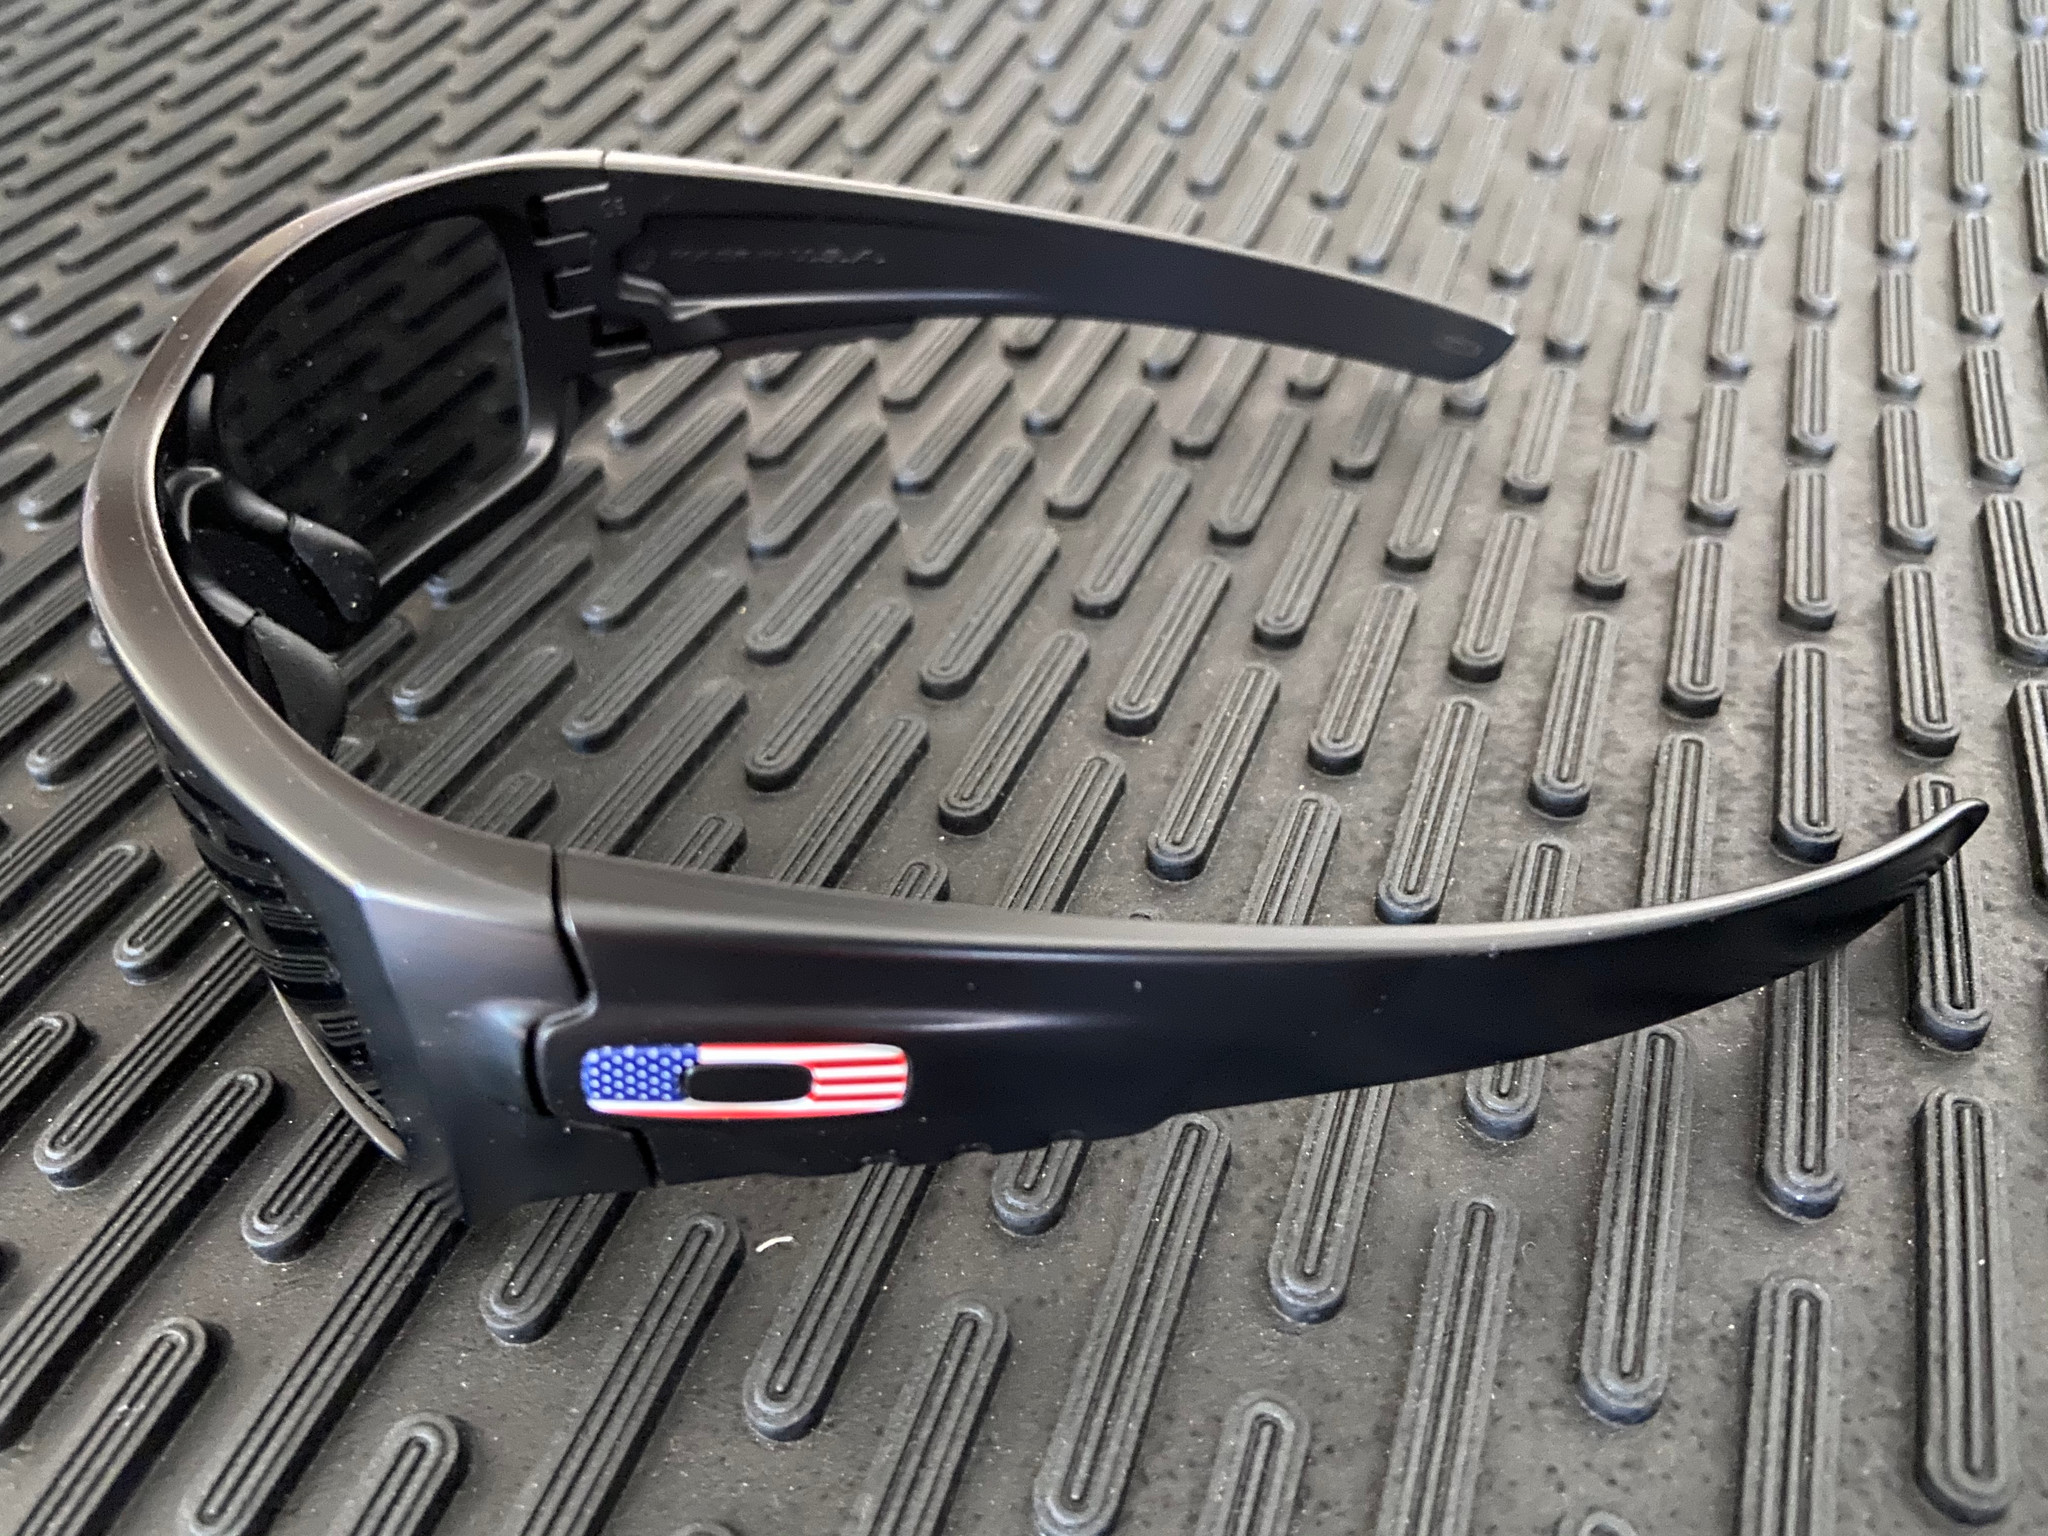 OAKLEY SI Fuel Cell USA Flag Collection Matte Black/Gray